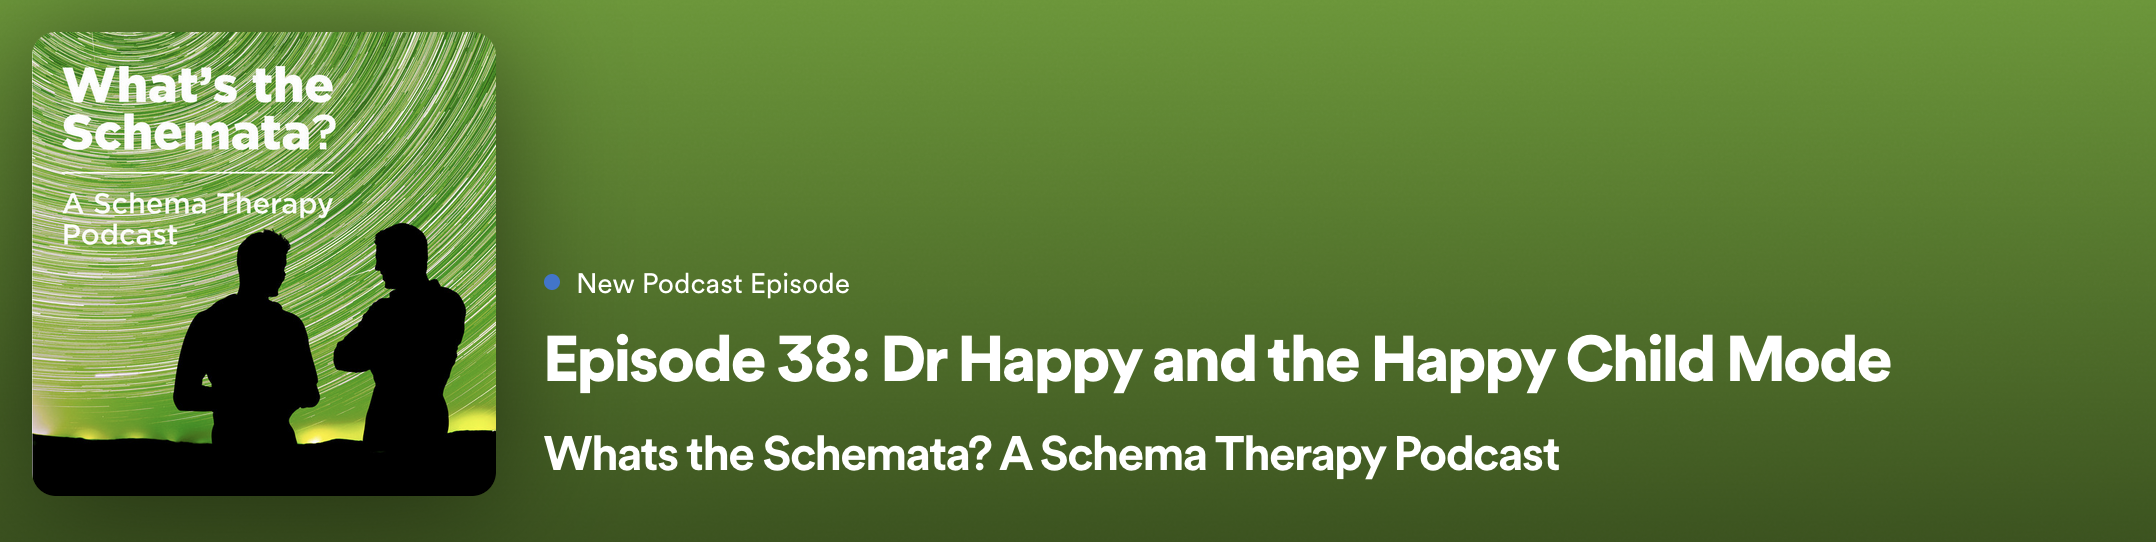 Dr Happy episode 38 whats the schemata